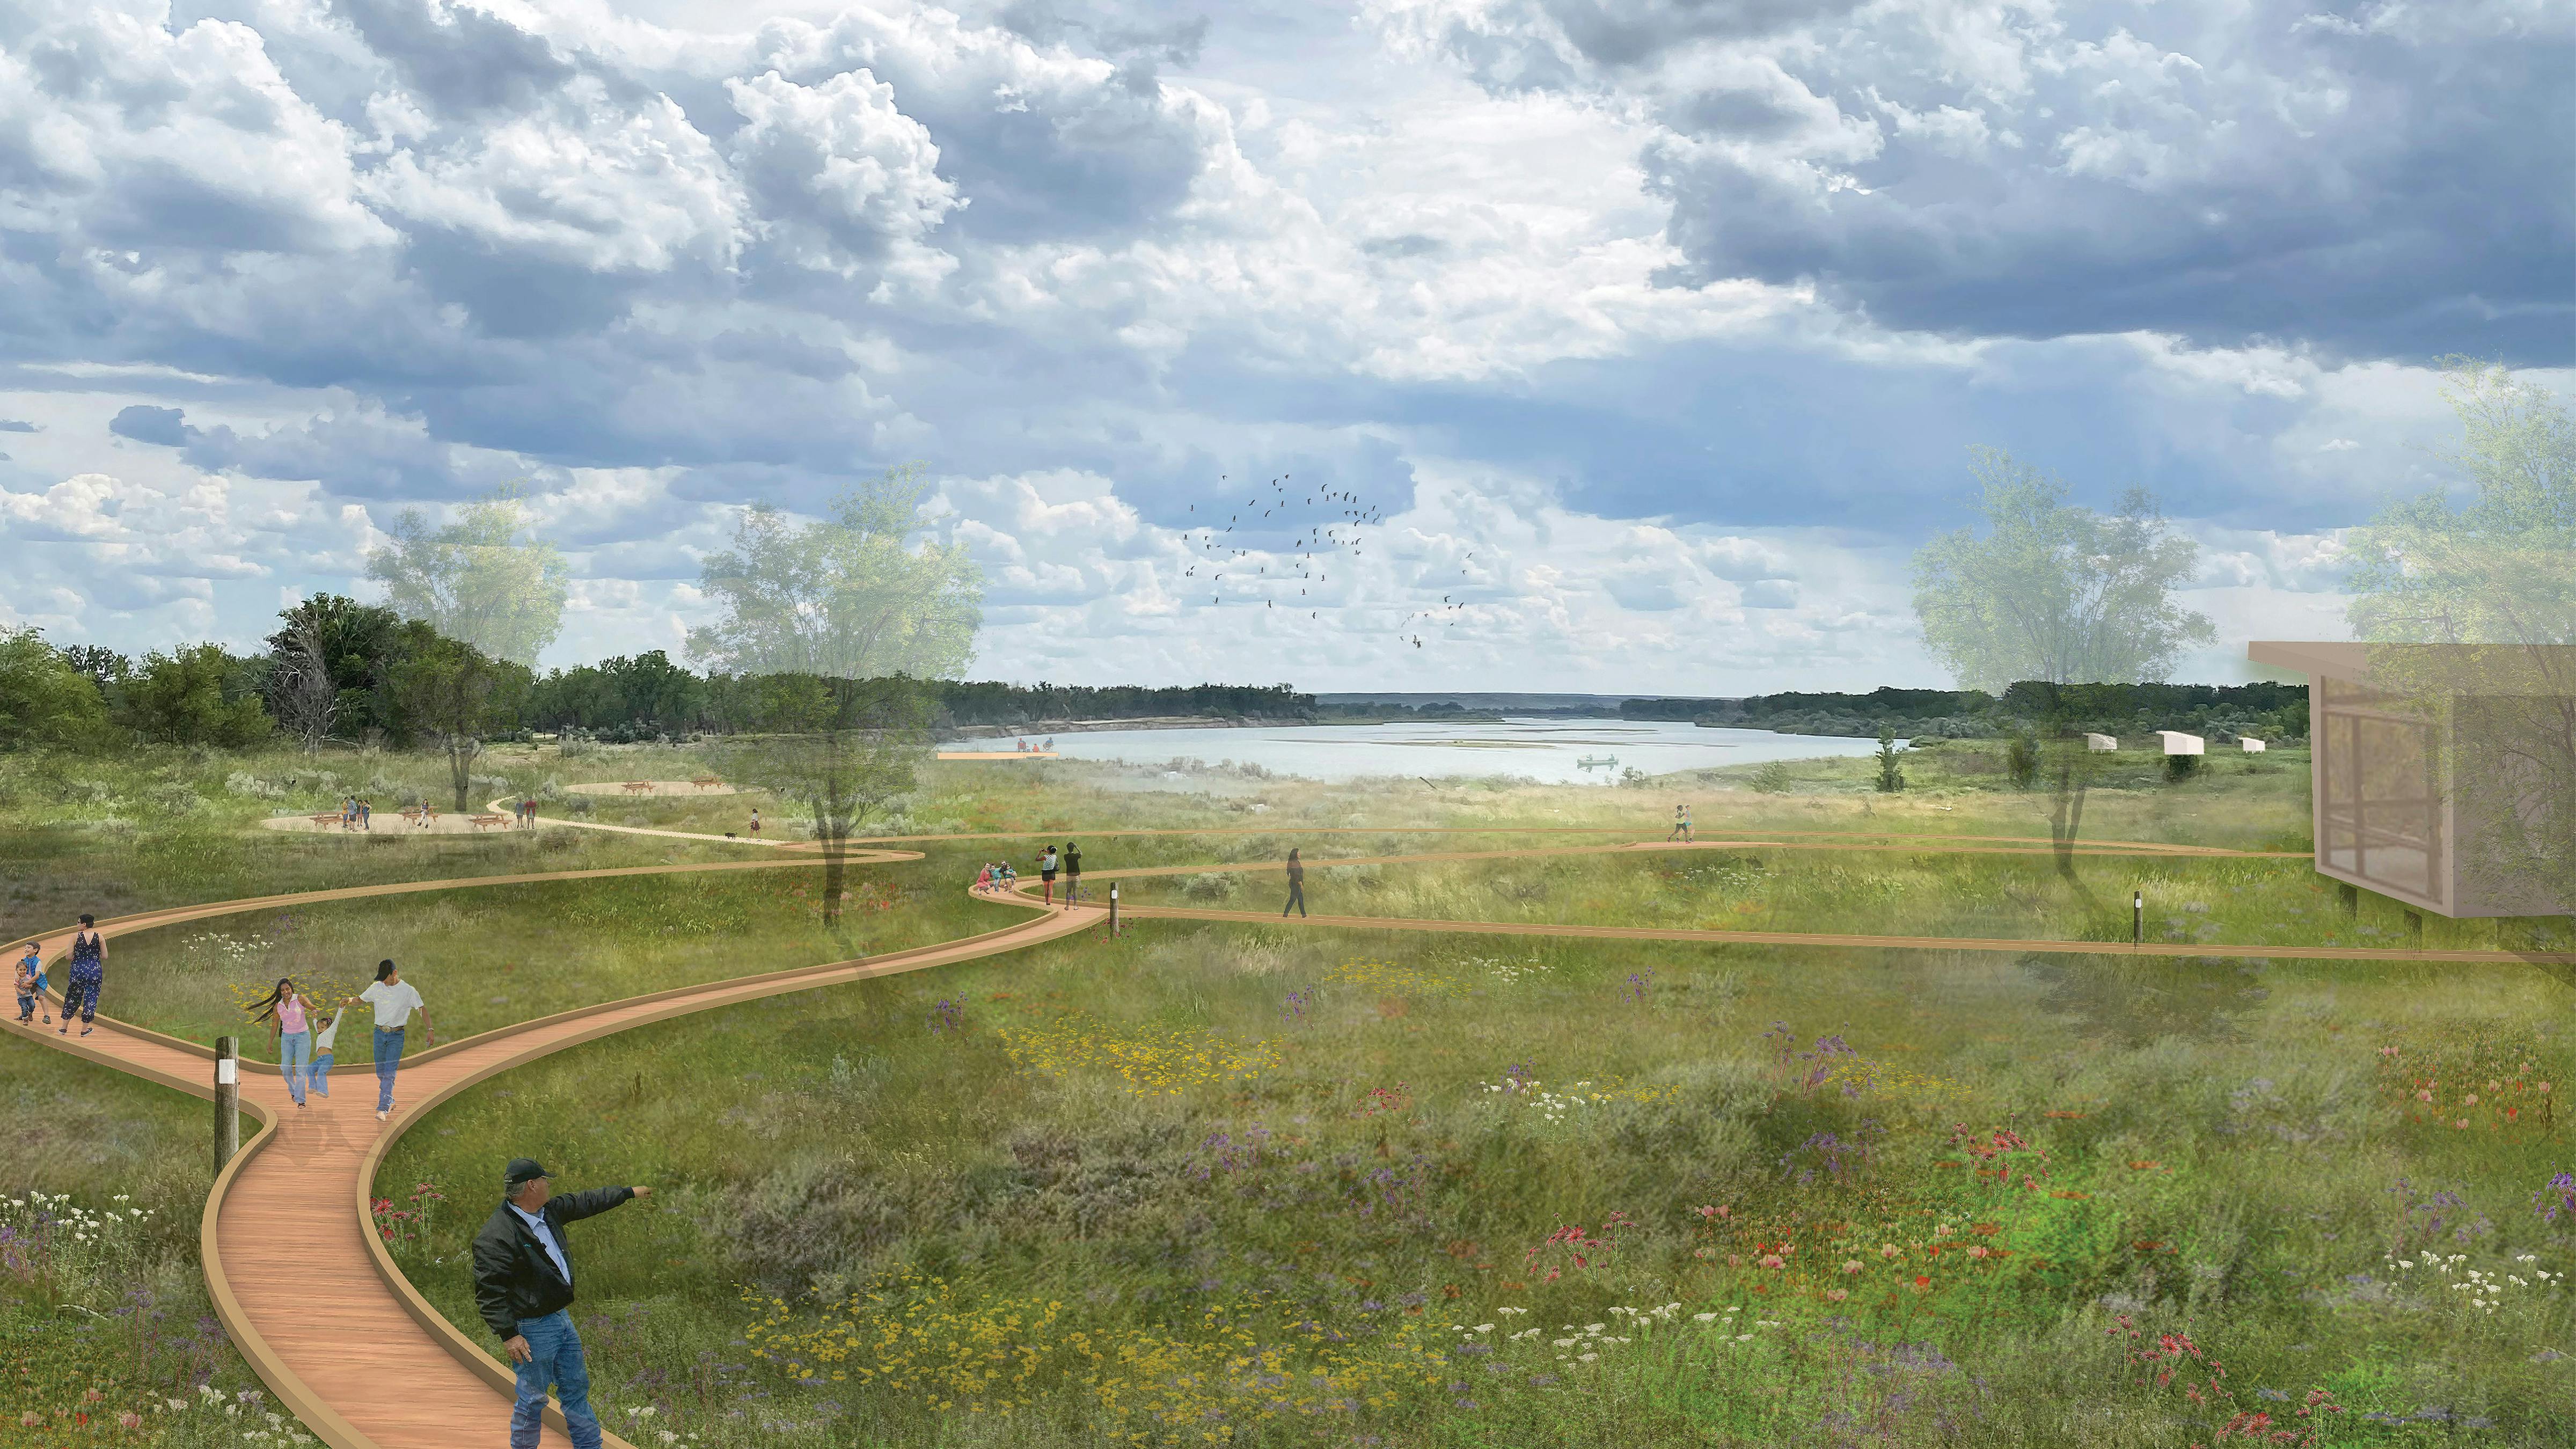 Rendering of Nature Park with raised boardwalk walkways and natural landscape next to river.